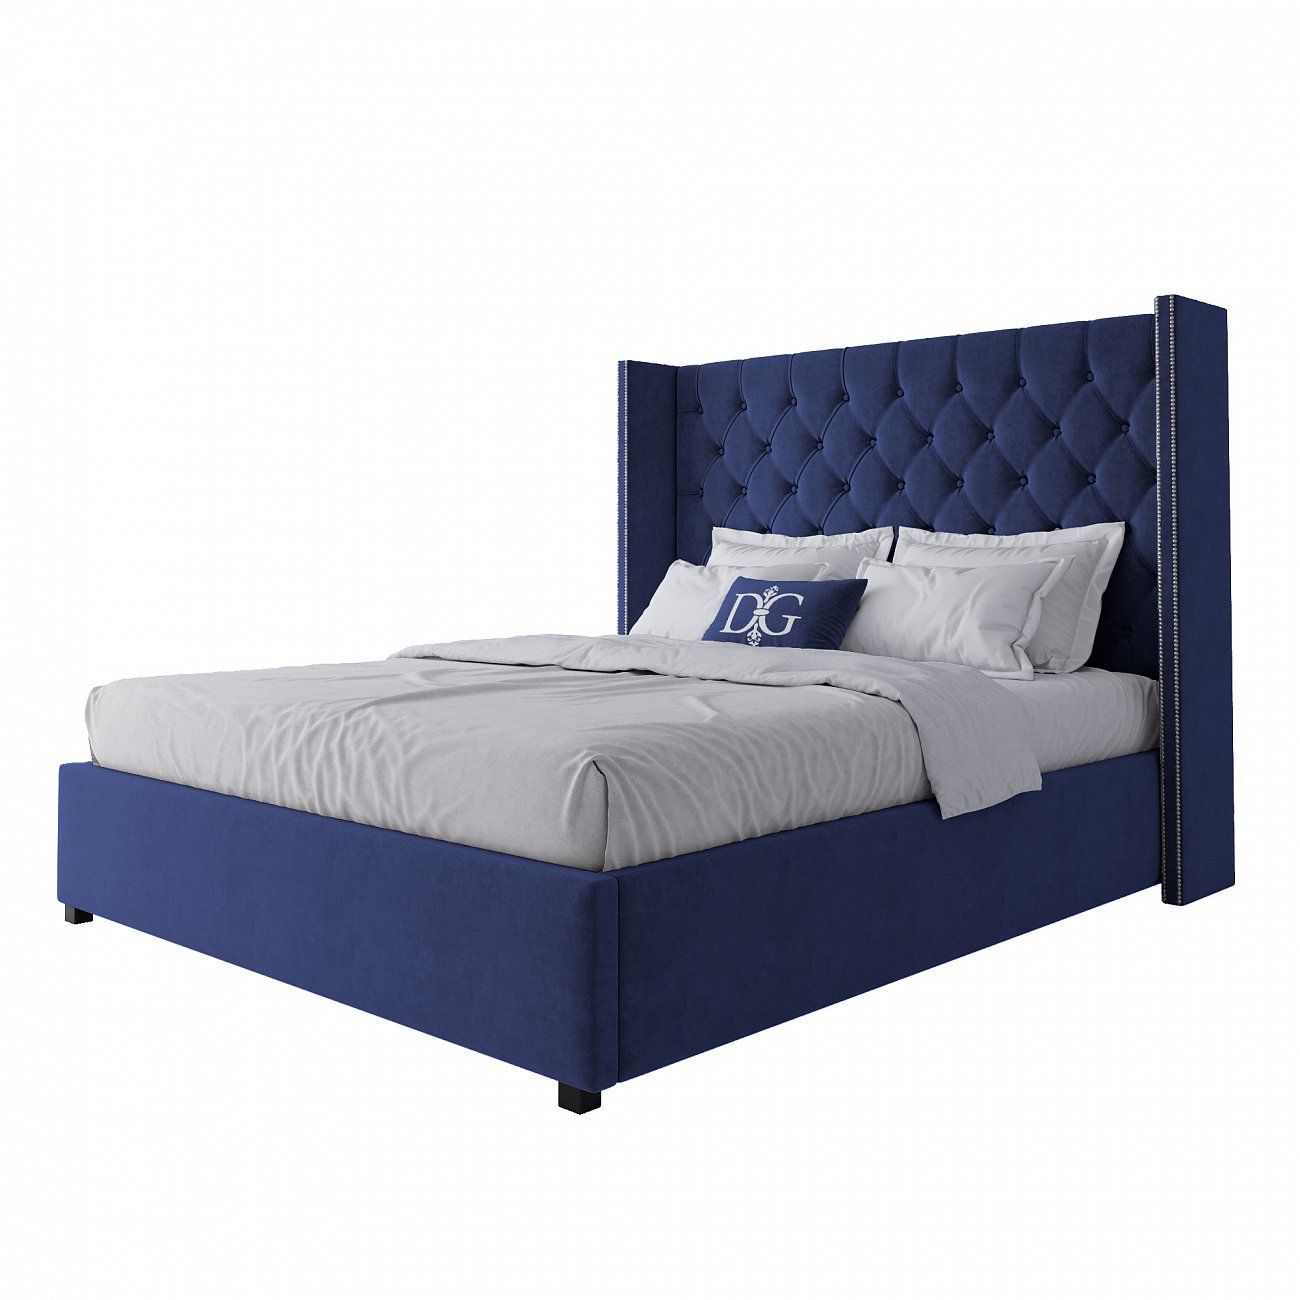 Double bed with upholstered headboard 160x200 cm blue Wing